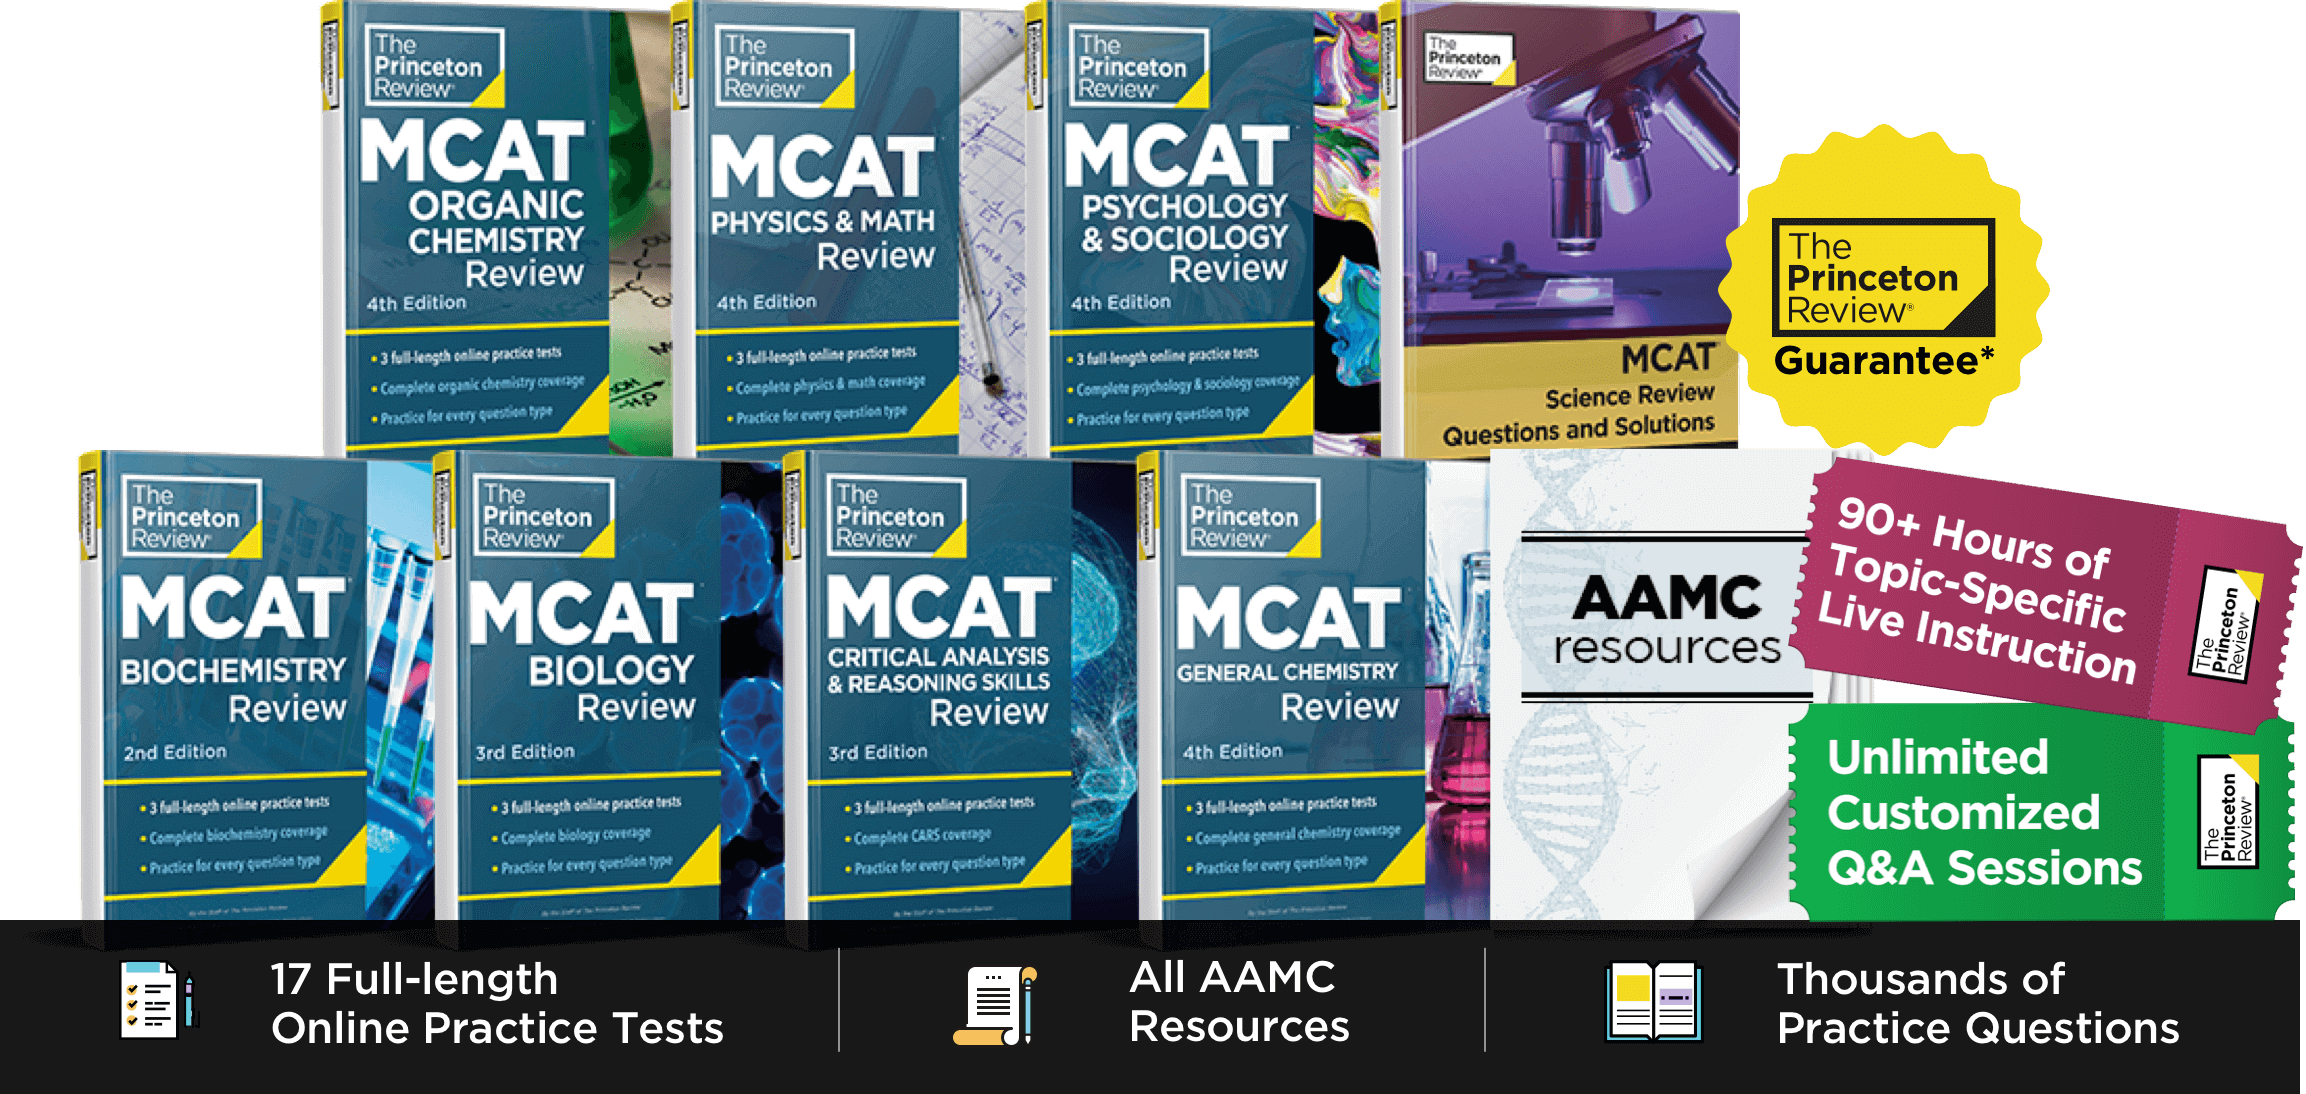 Mcat Self-Paced | The Princeton Review